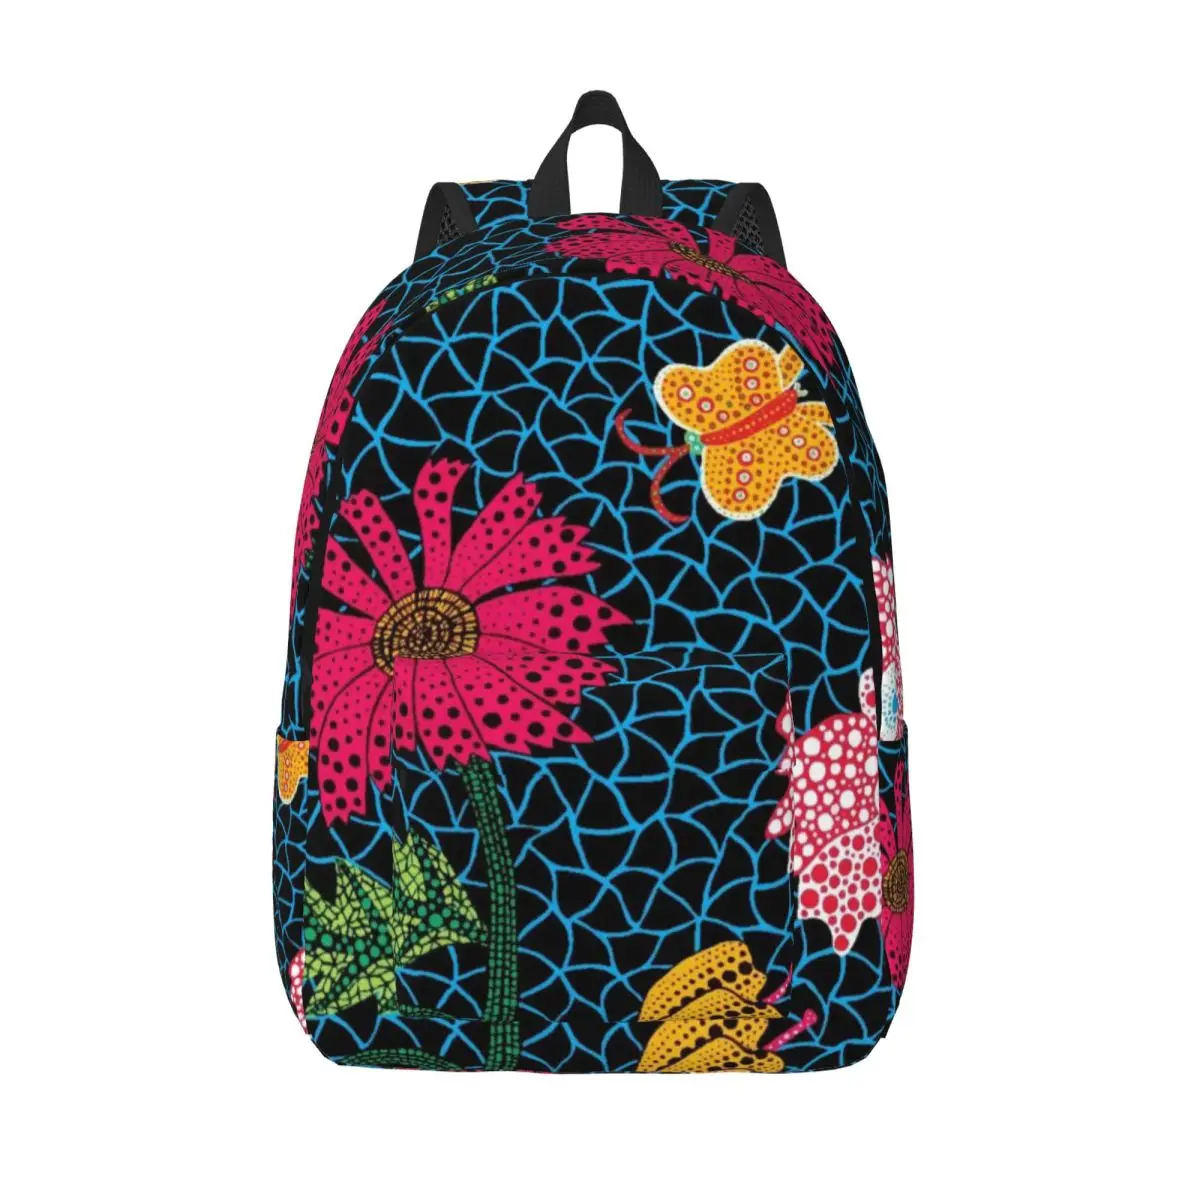 

Yayoi Kusama Flowers Canvas Backpack for Women Men College School Students Bookbag Fits 15 Inch Laptop Abstract Art Bags